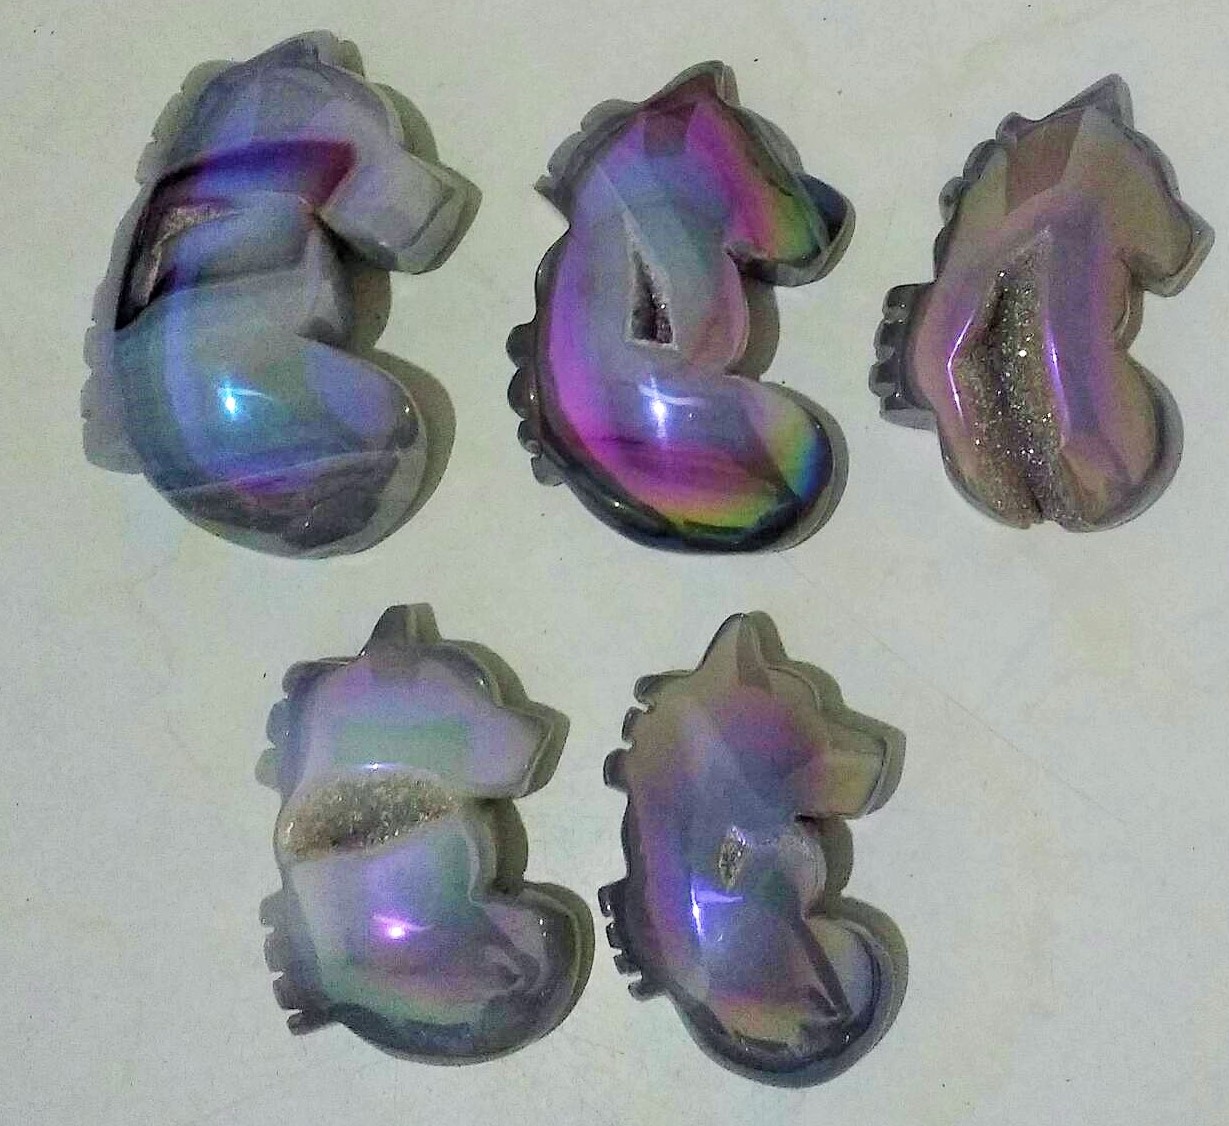 Stones from Uruguay -  Angel Flame Aura Agate Druzy Seahorse Cabochons - Angel  Royal Aura Agate Druzy Seahorse Cabochons -  Titanium Aura Coated  Agate Druzy Seahorse Cabochons